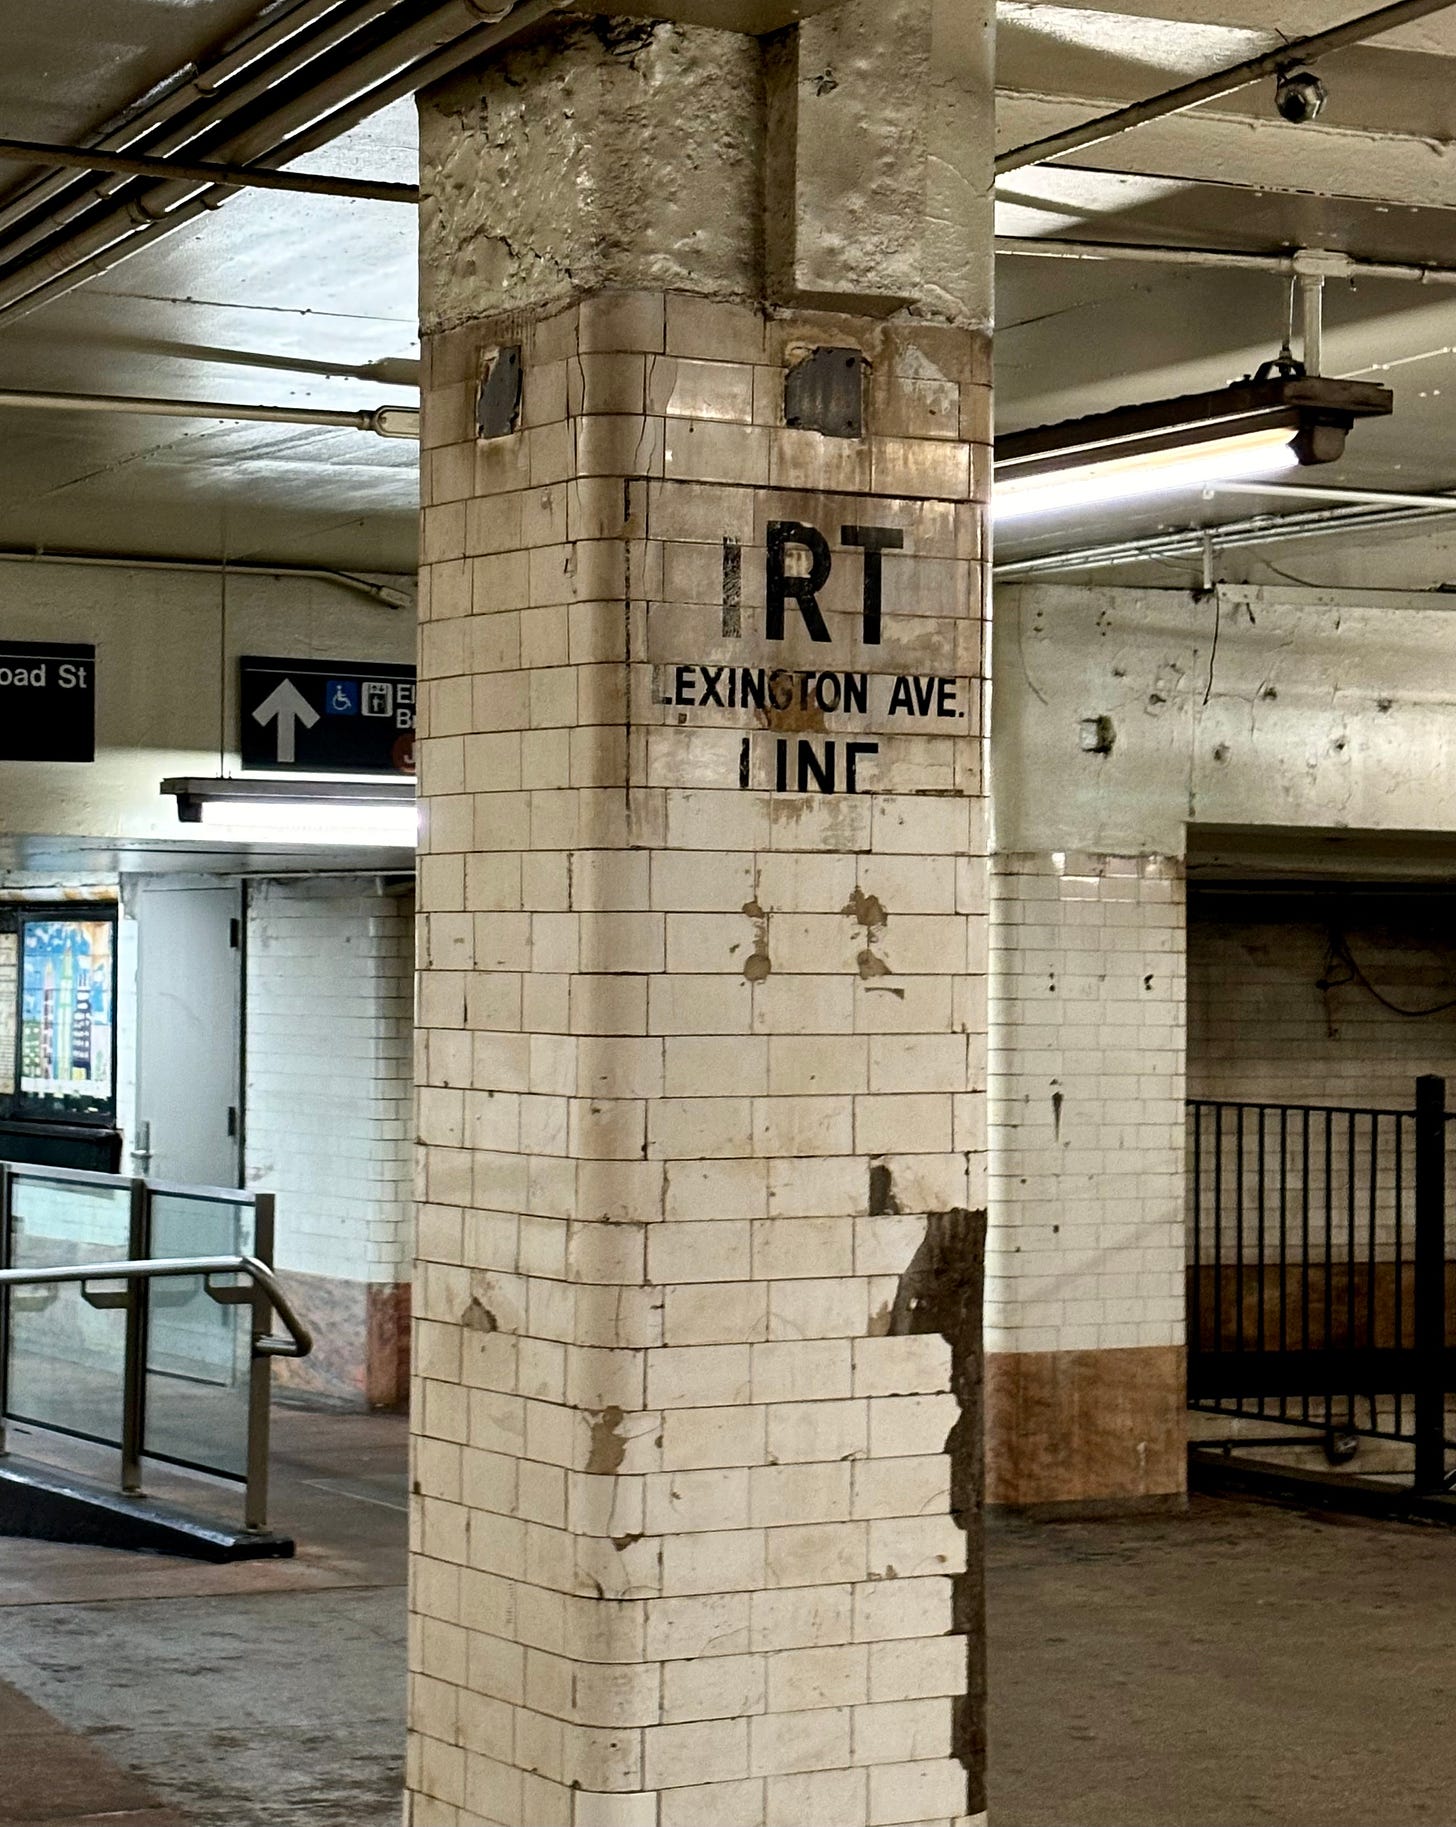 A white tiled column in a subway station. In black letters it says IRT LEXINGTON AVE. LINE in slightly battered lettering.